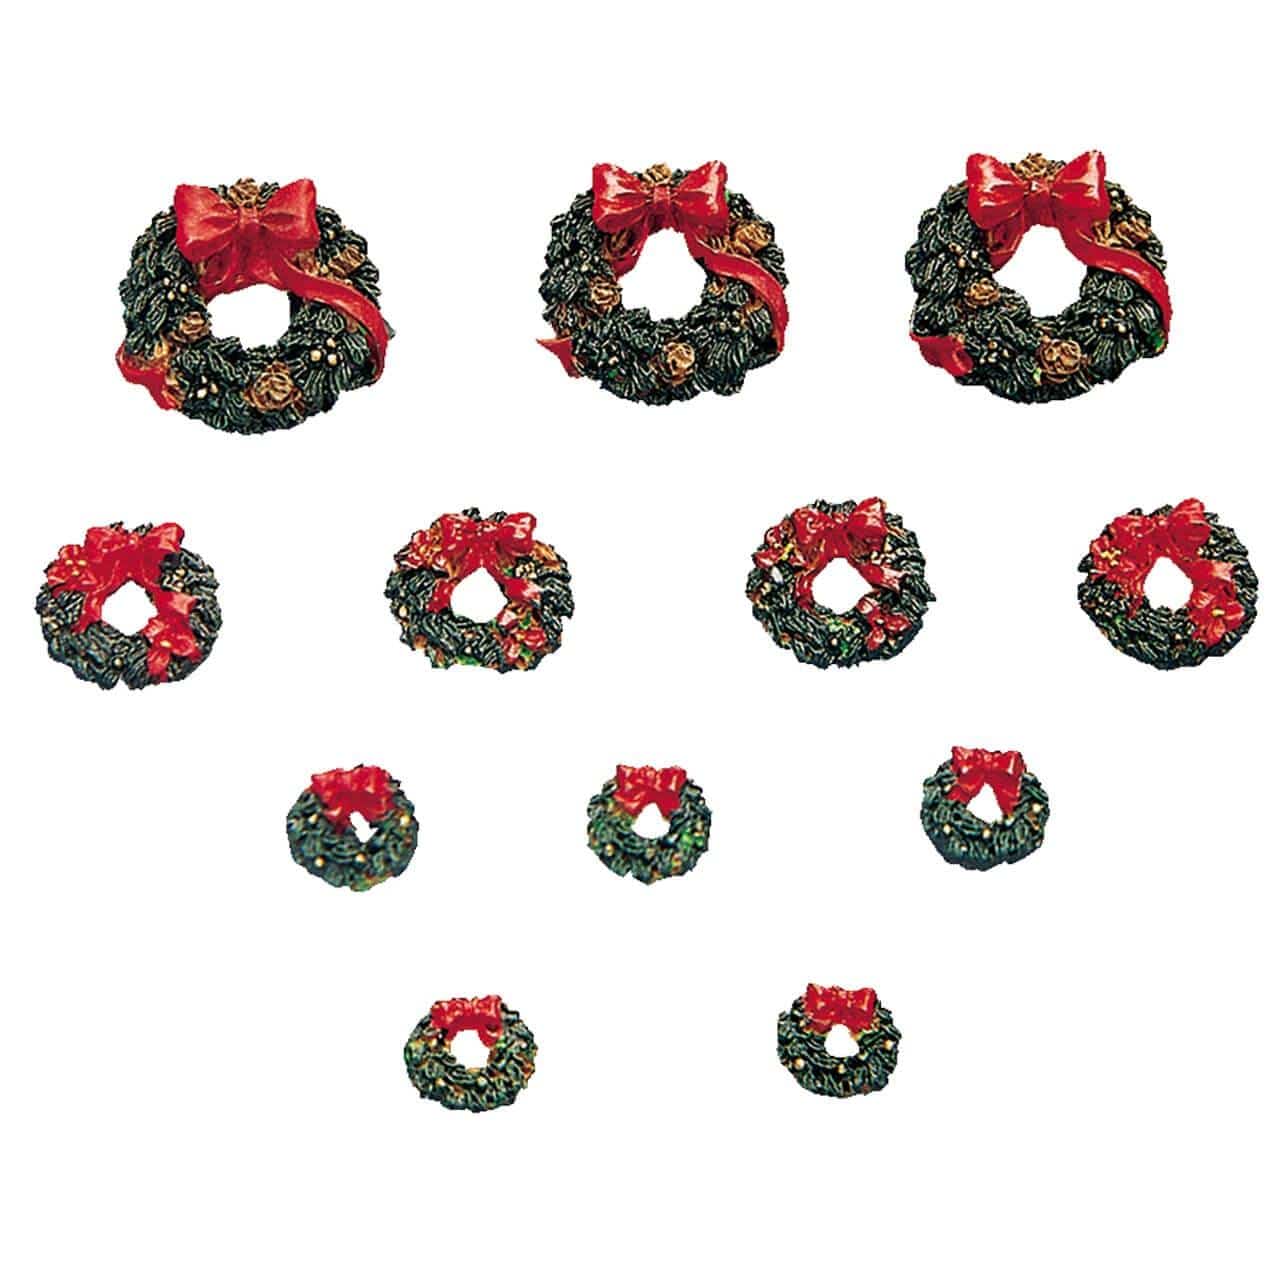 Lemax Accessory Lemax Accessory Wreaths With Red Bow, Set of 12